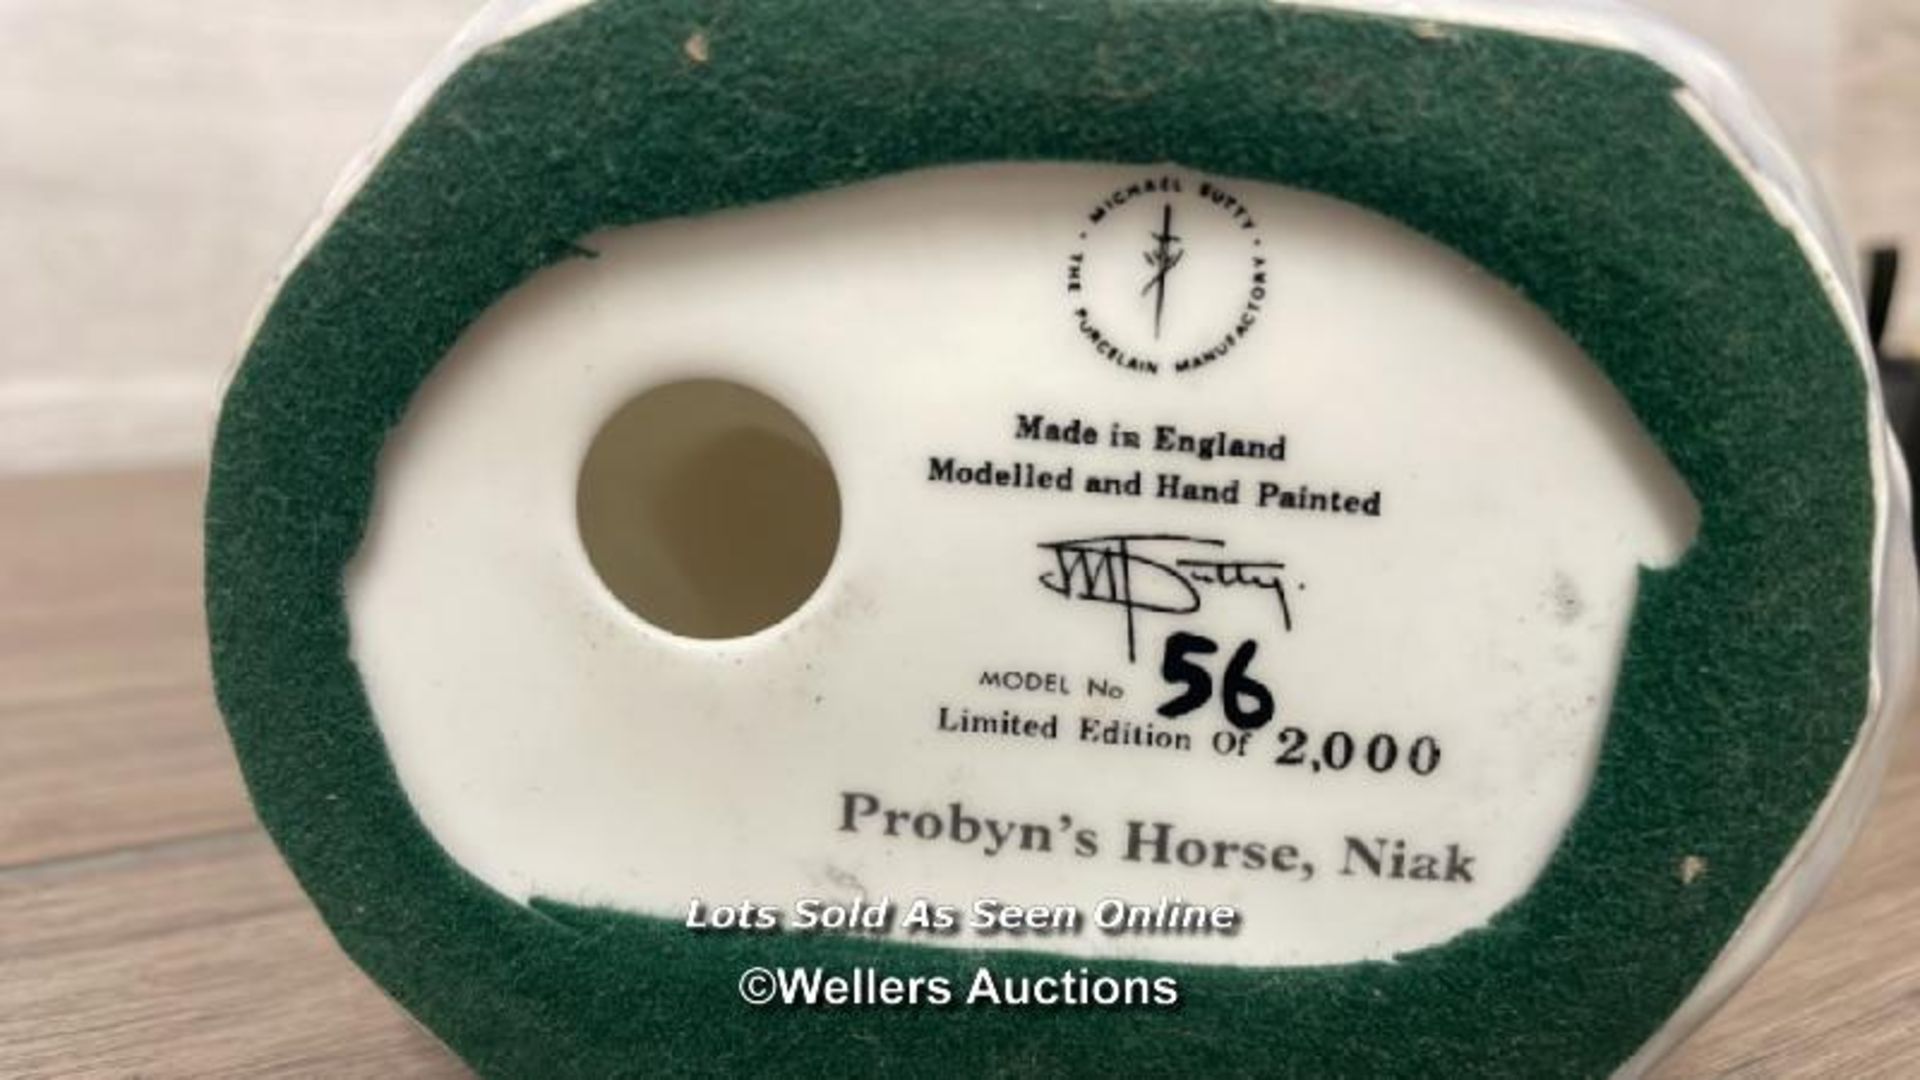 MICHAEL J SUTTY HAND PAINTED PORCELAIN FIGURE, PROBYN'S HORSE, NIAK, MODEL NO.56 LIMITED EDITION - Image 4 of 4